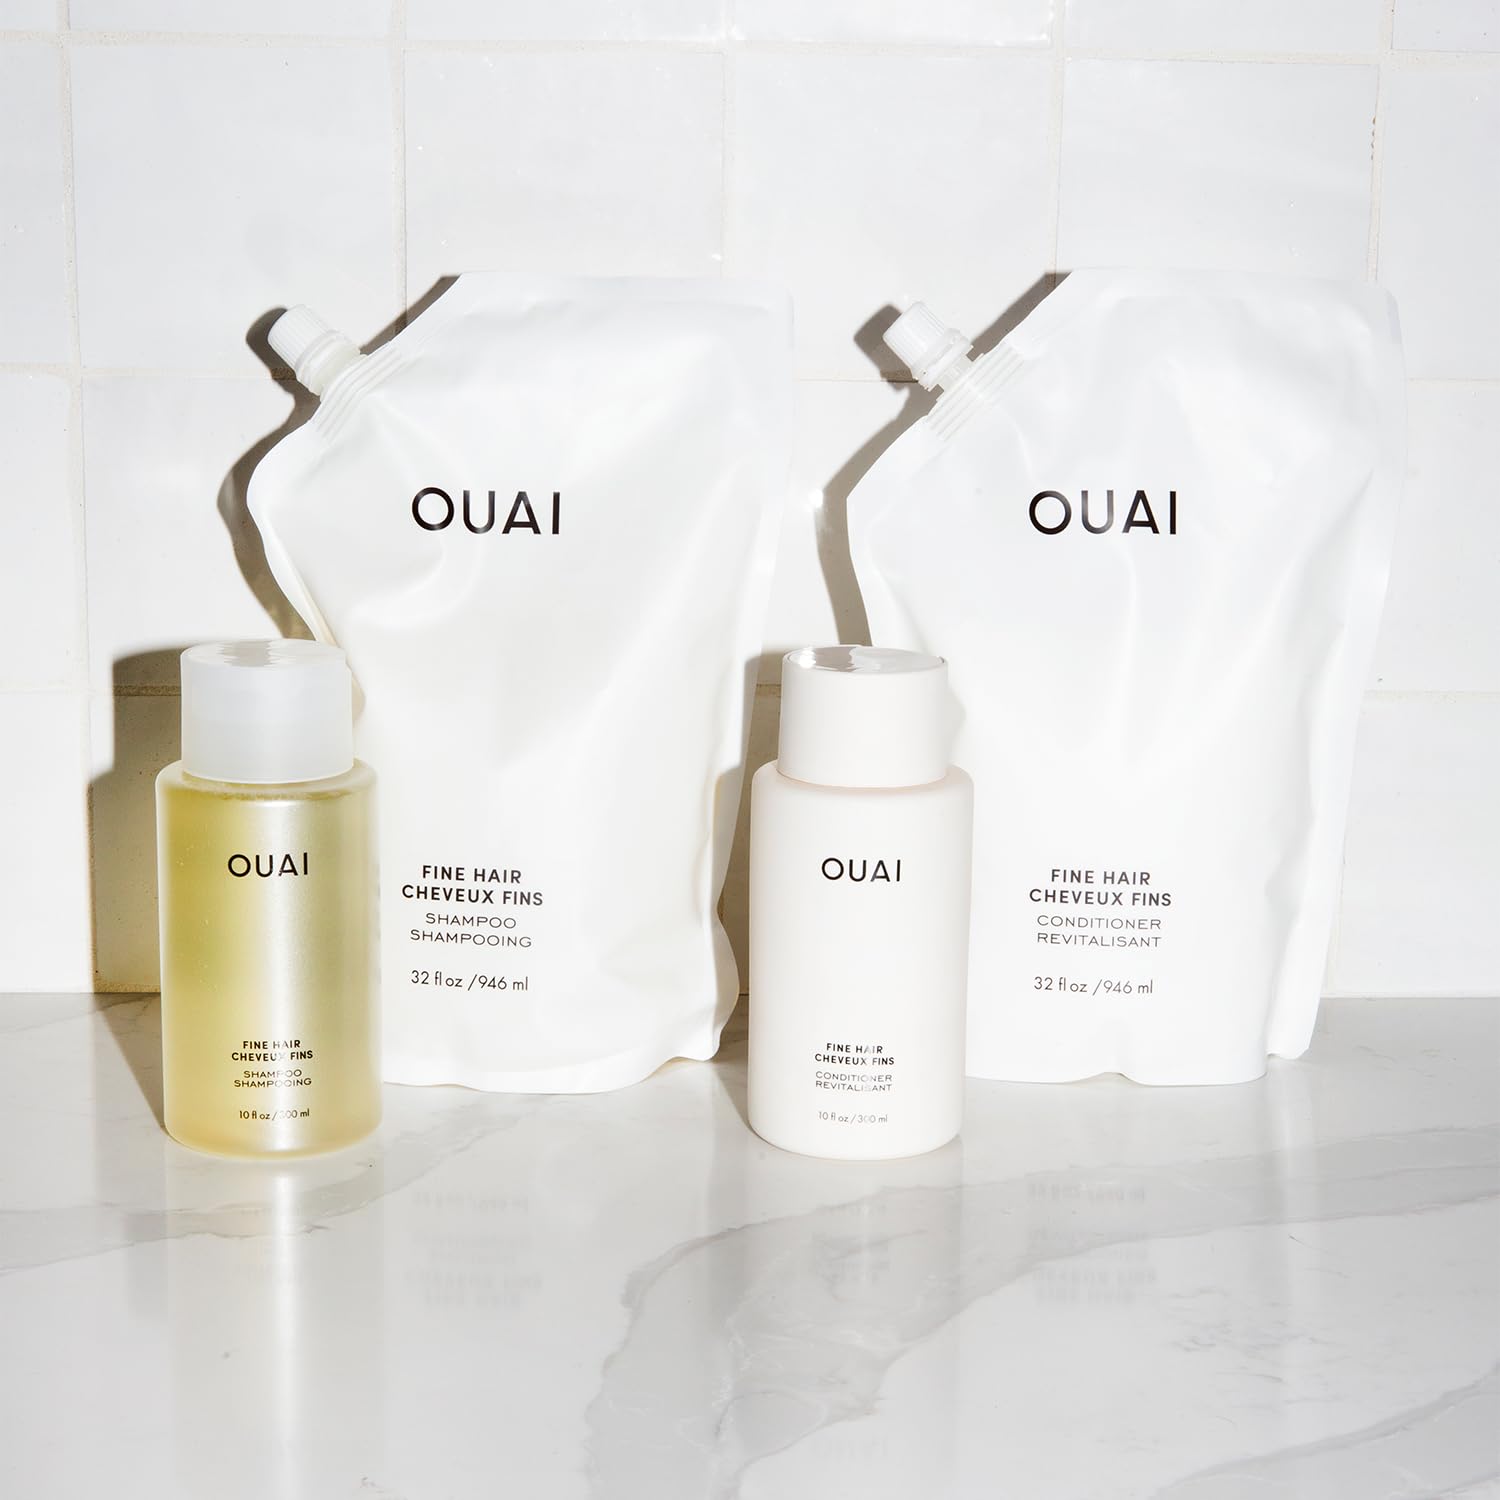 OUAI Fine Hair Conditioner Refill - Volumizing Conditioner Made with Keratin, Biotin and Chia Seed Oil - Adds Softness, Bounce and Volume - Free from Parabens, Sulfates, and Phthalates (32 oz) : Beauty & Personal Care